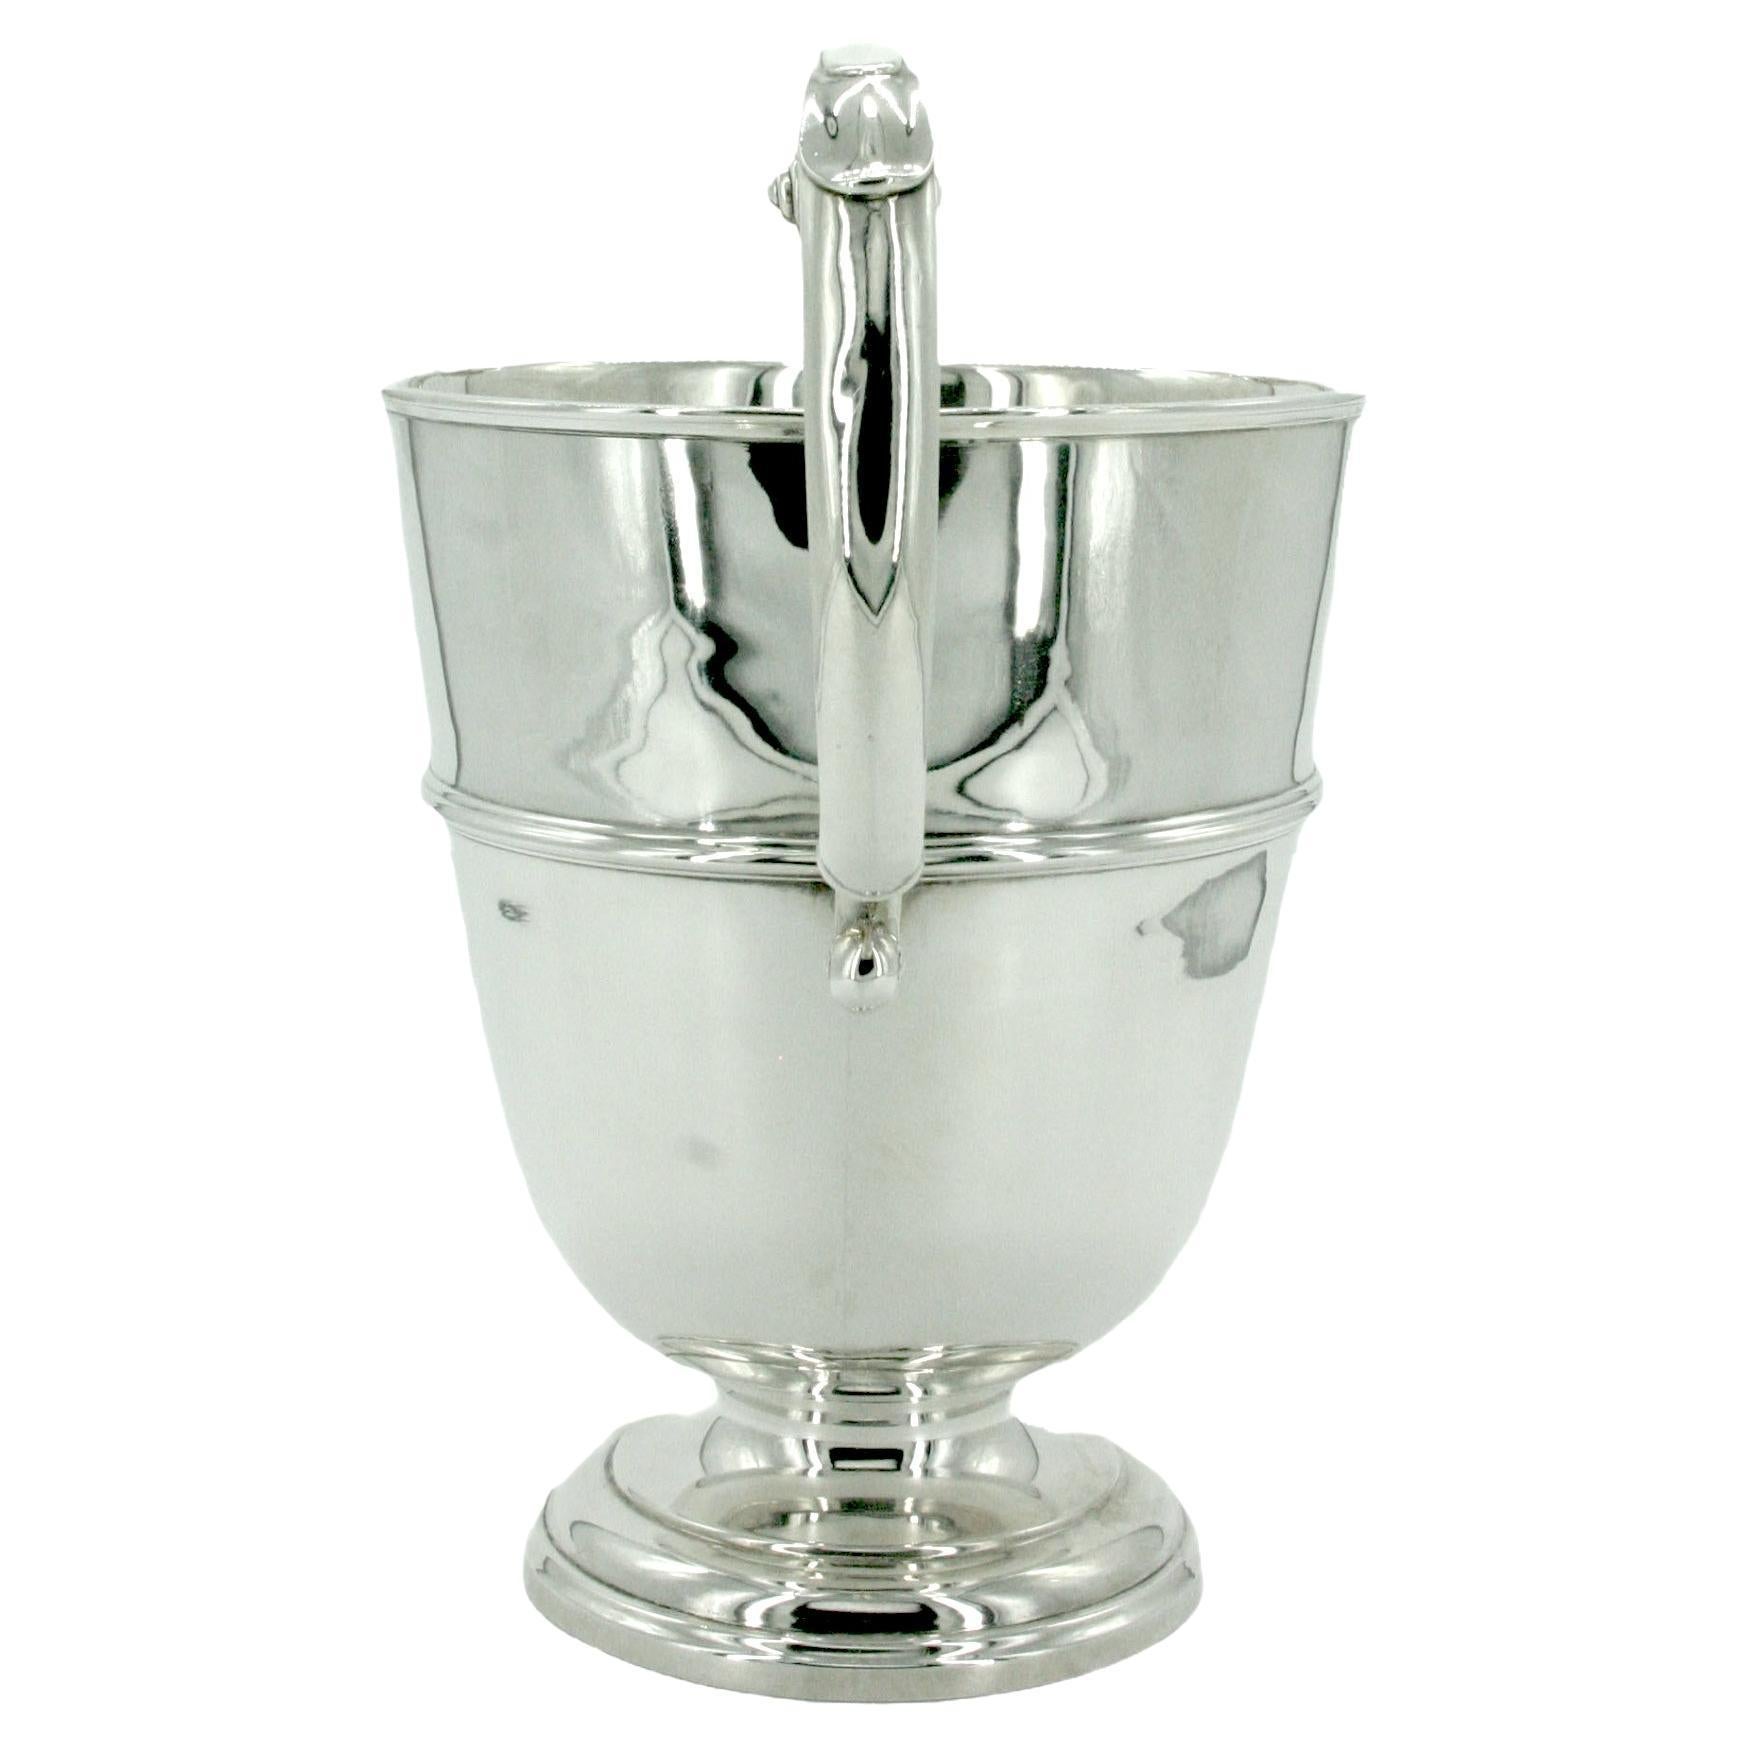 Early 20th century sterling silver two handled champagne/wine cooler bucket by William Hutton 